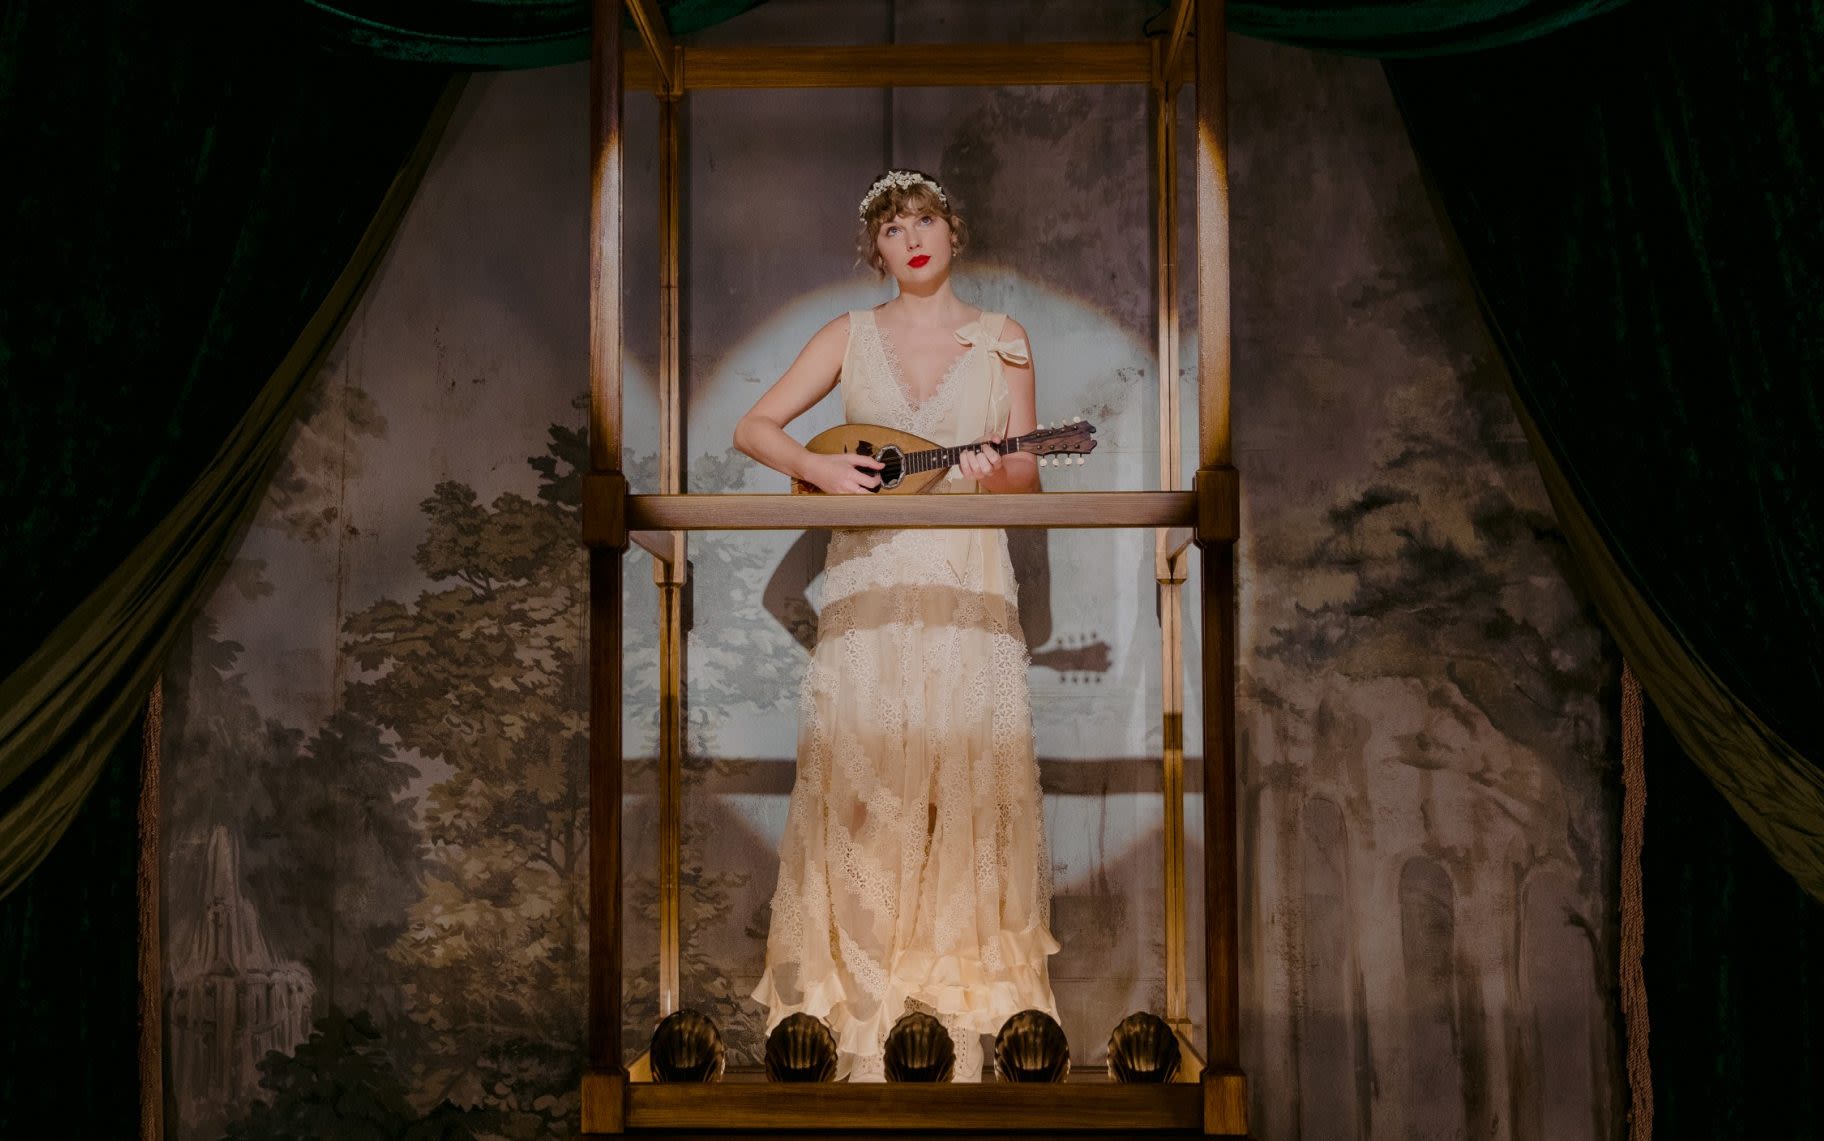 Taylor Swift: Songbook Trail, V&A: Brilliant chronicle of a life lived in the spotlight